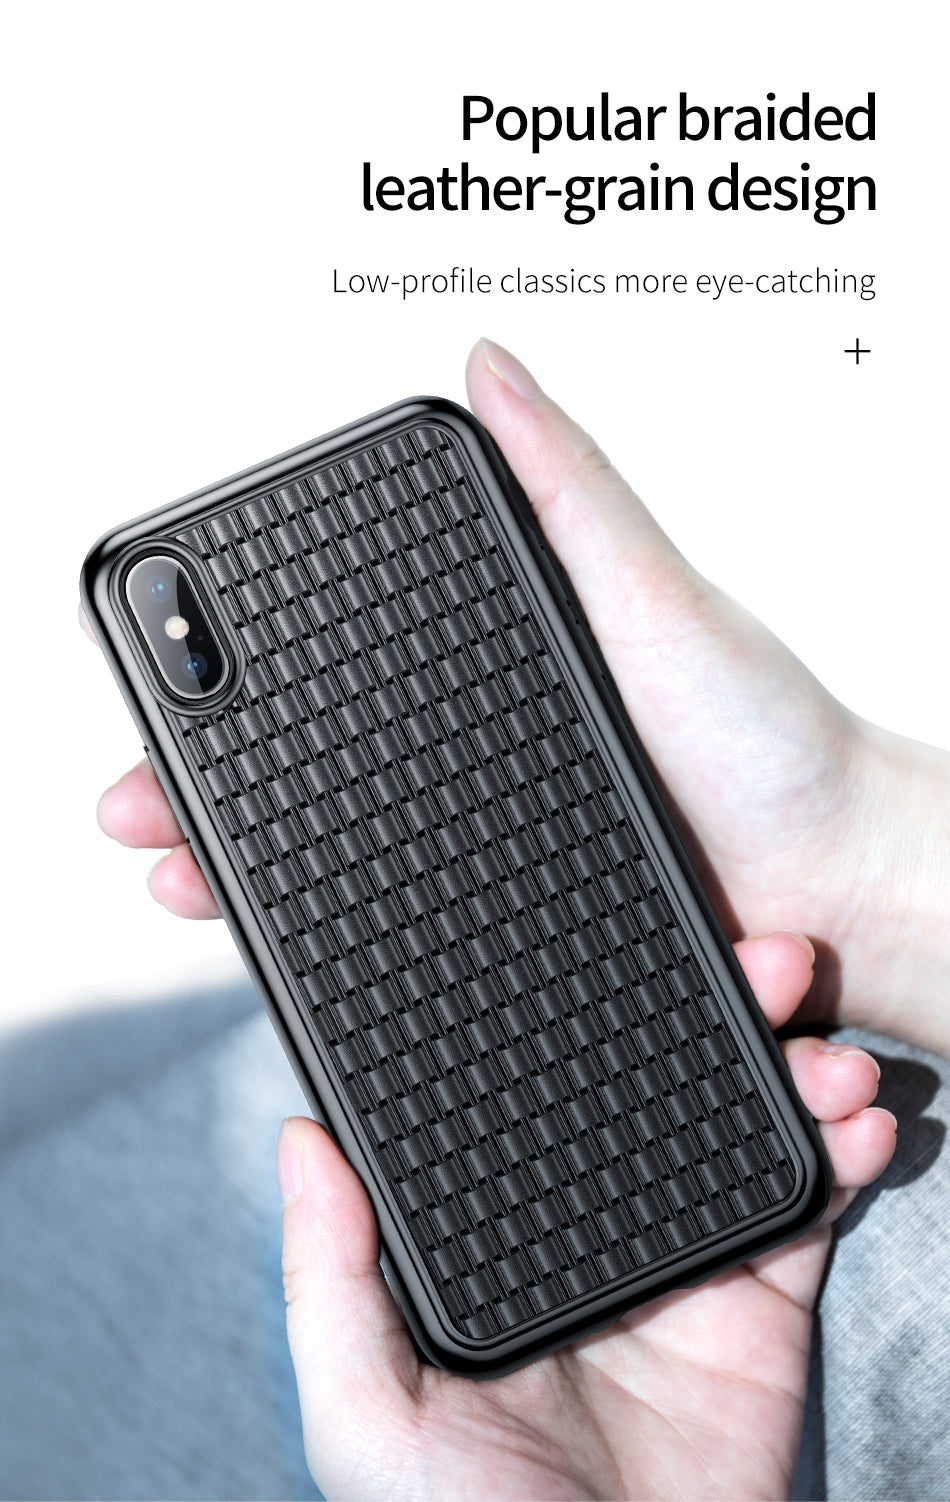 BV 2nd Generation By Baseus Slim Flexible Case For iPhone Xs Max Black